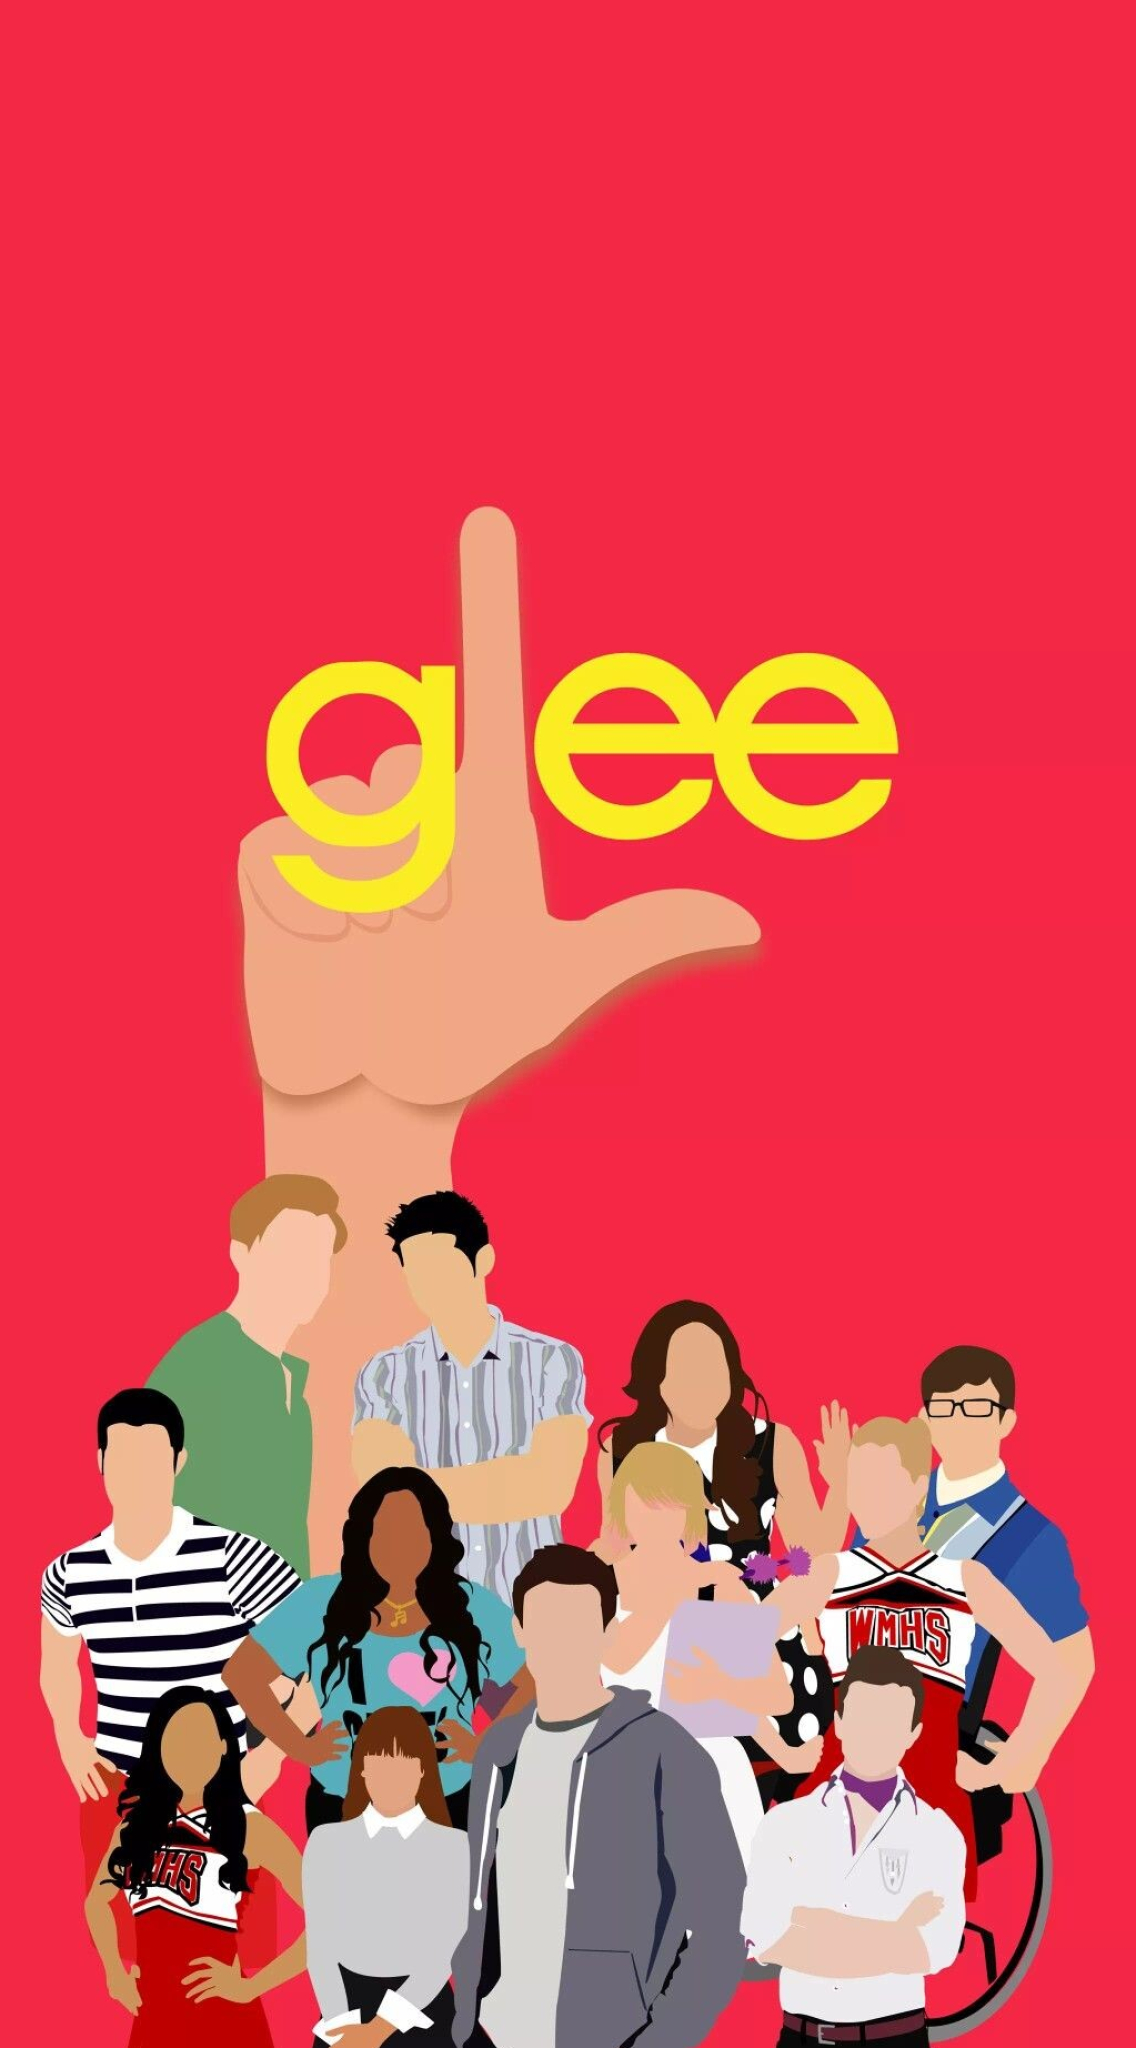 Glee (TV series): A show centered on the travails of a show choir at the fictional William McKinley High School. 1140x2050 HD Background.